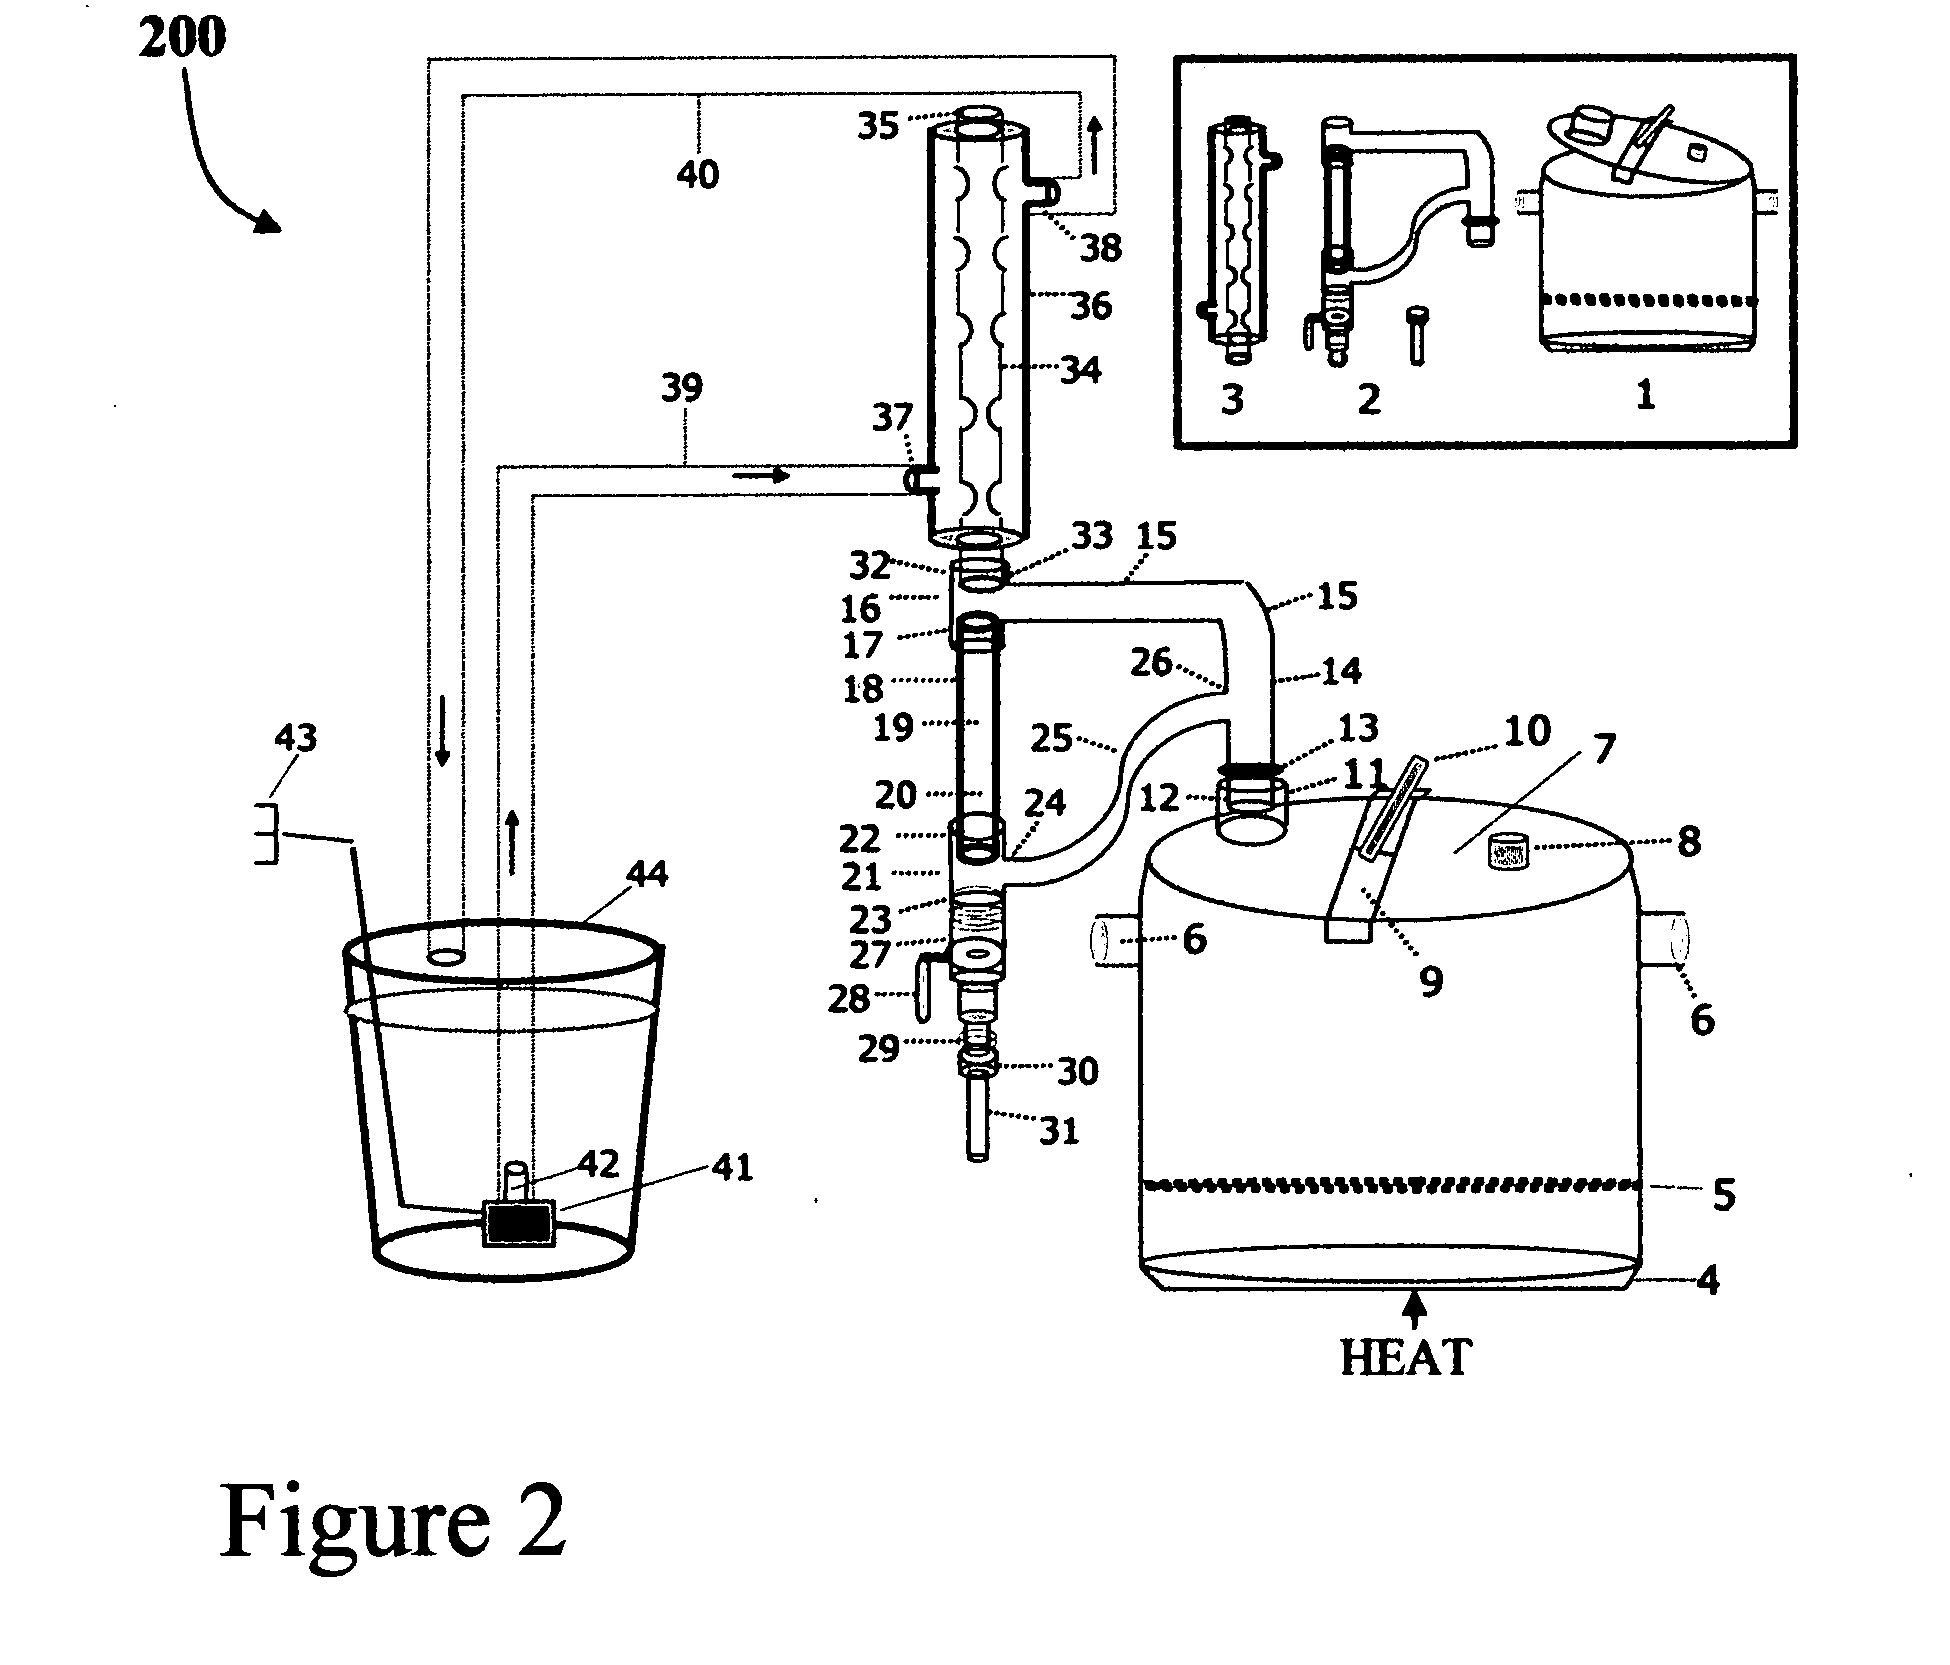 Small and efficient distillation apparatus for extraction of essential oils from plant matter